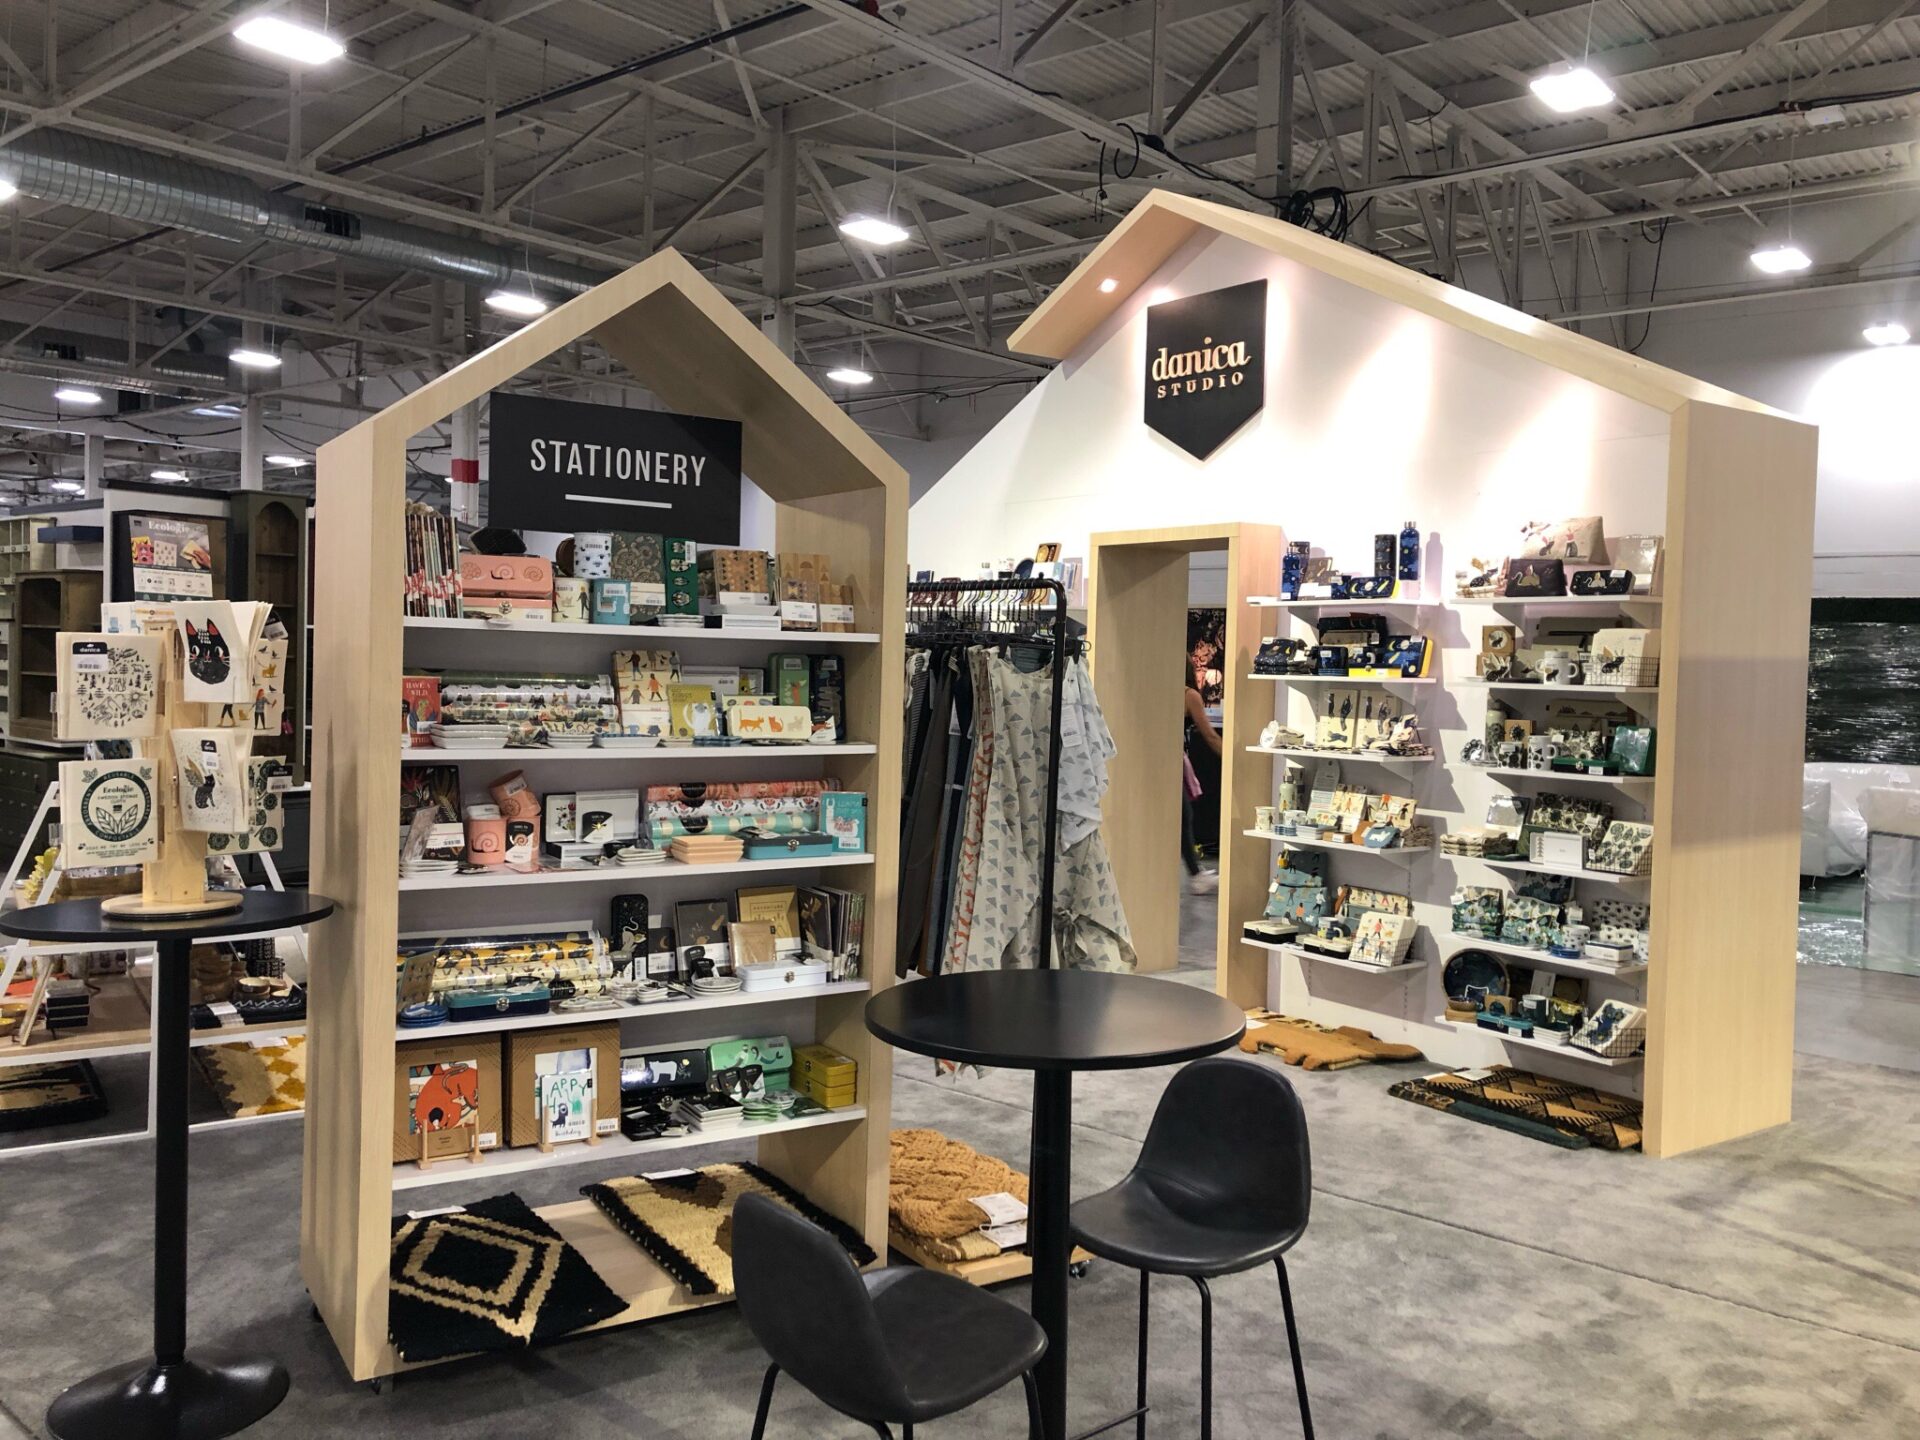 Danica trade show booth with wood and home decor/gifts